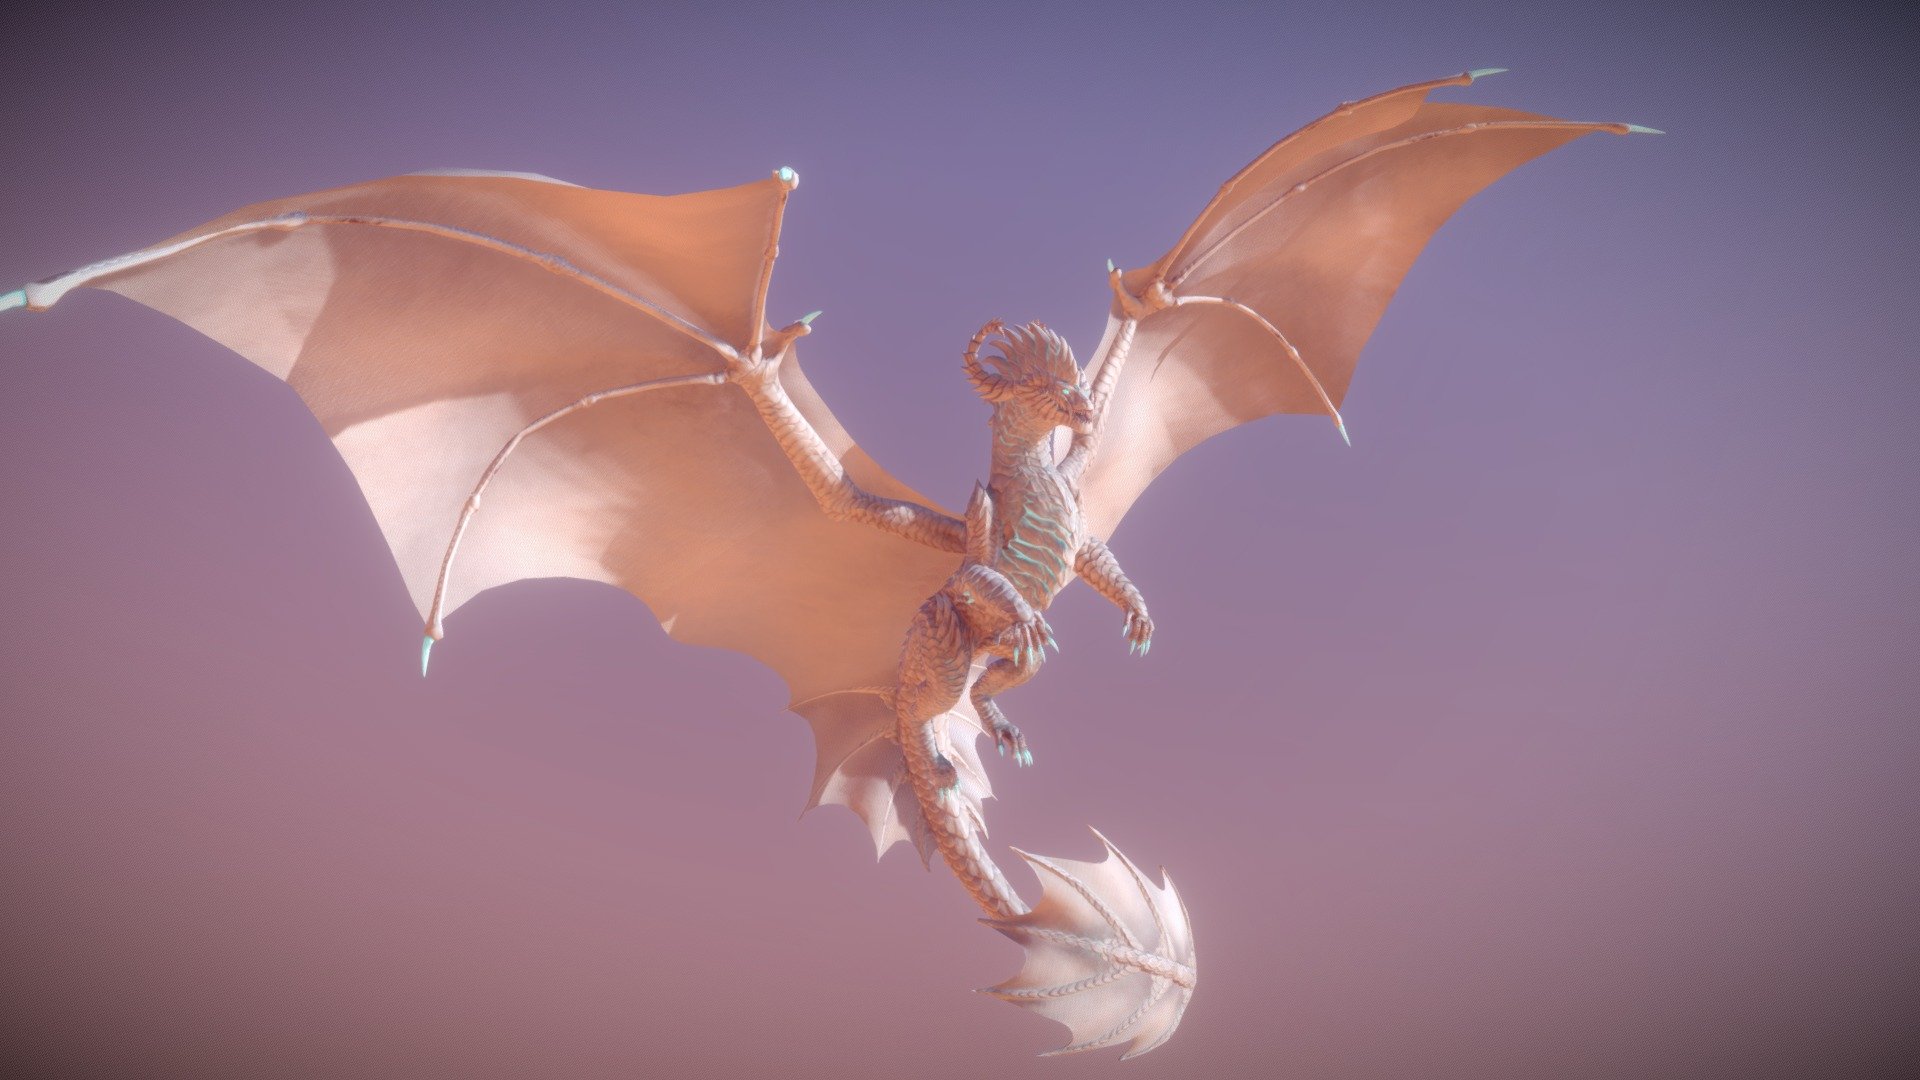 A beautiful snow-white Dragon for Lucerphia Sorgan!)

More information about commissions can be found here and here: ◈ https://www.furaffinity.net/commissions/valdaris/ - Anvidian - 3D model by Arhirasoul 3d model